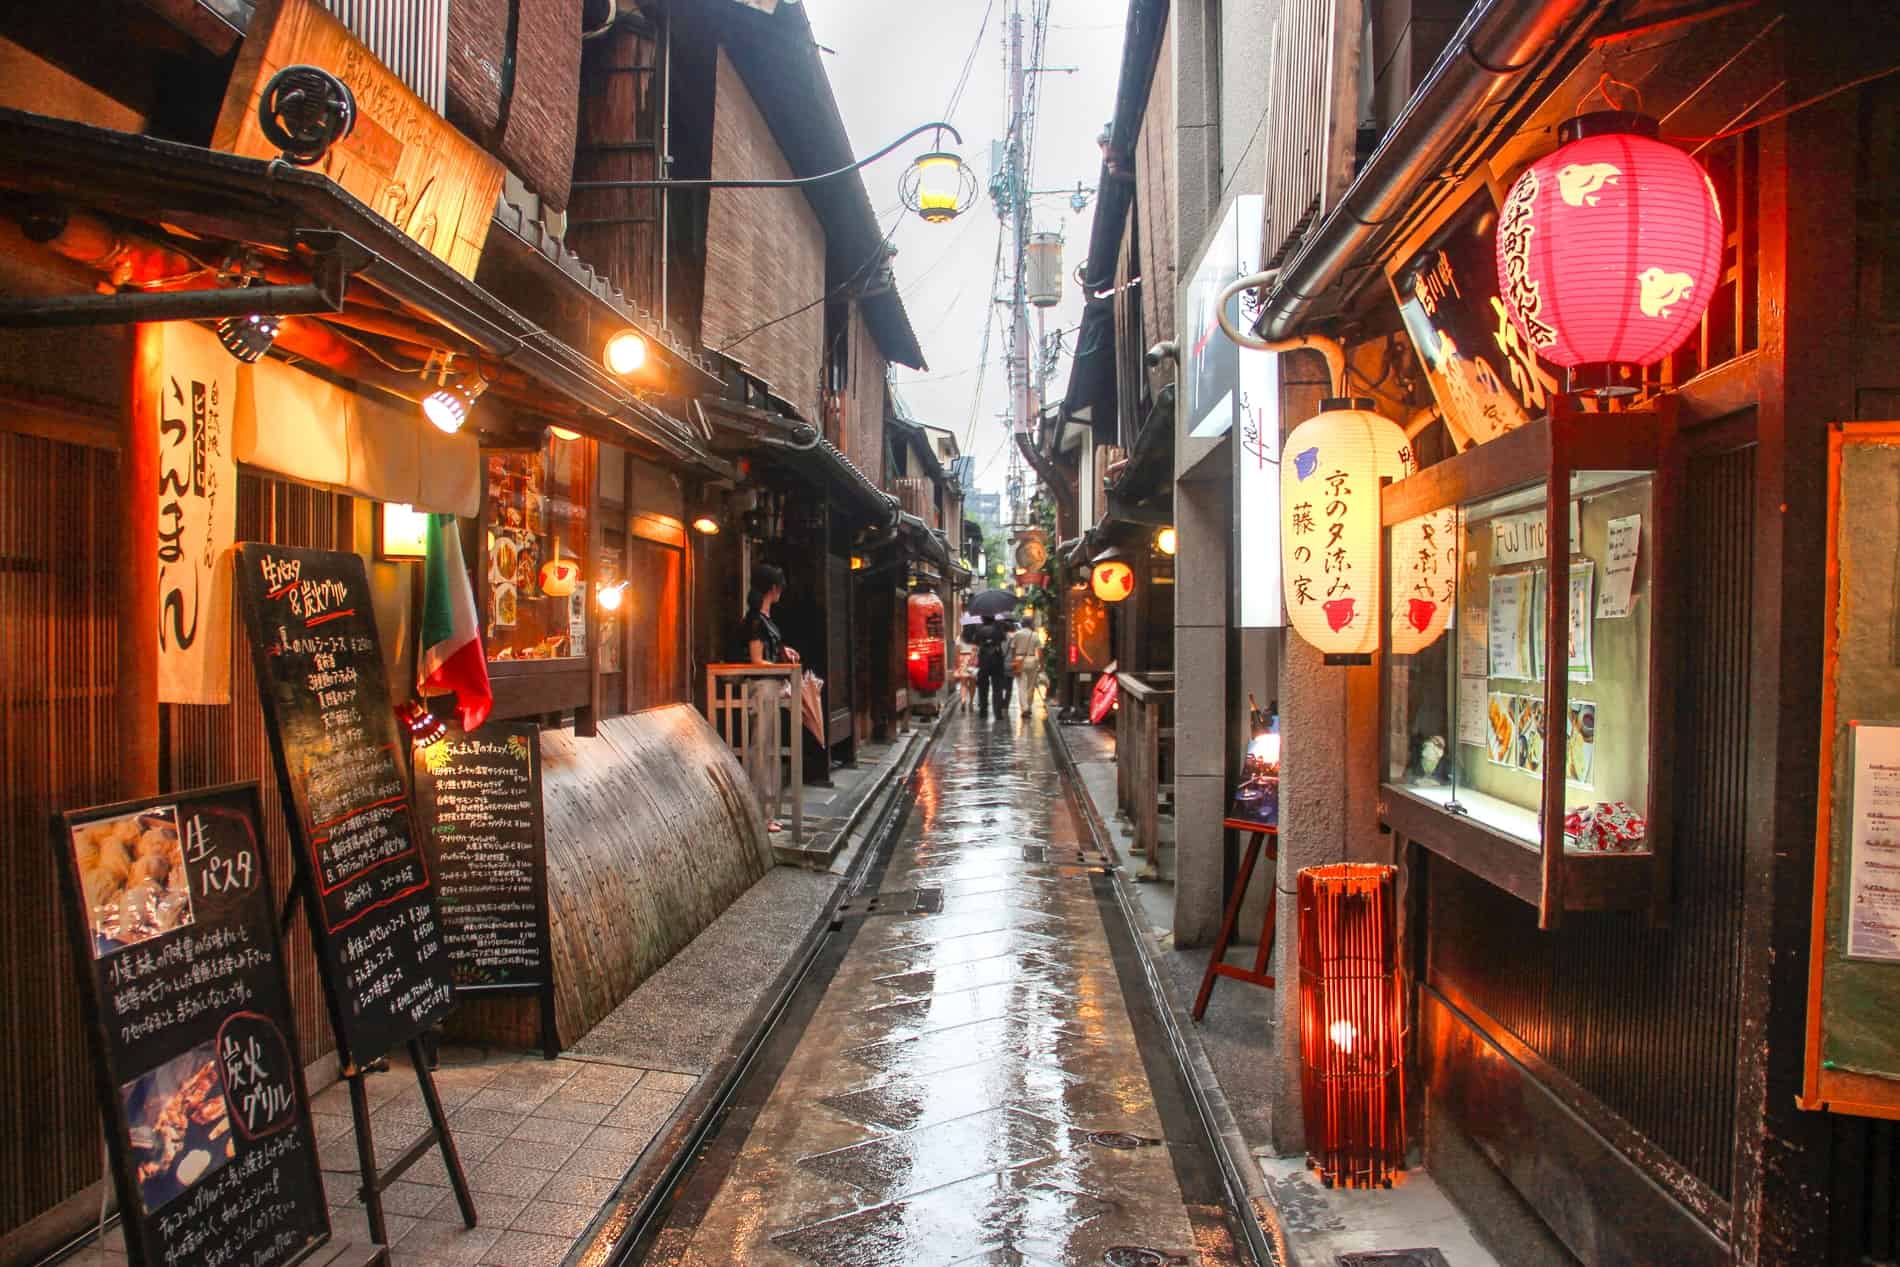 People in a narrow restaurant lined street in Gion, Kyoto.